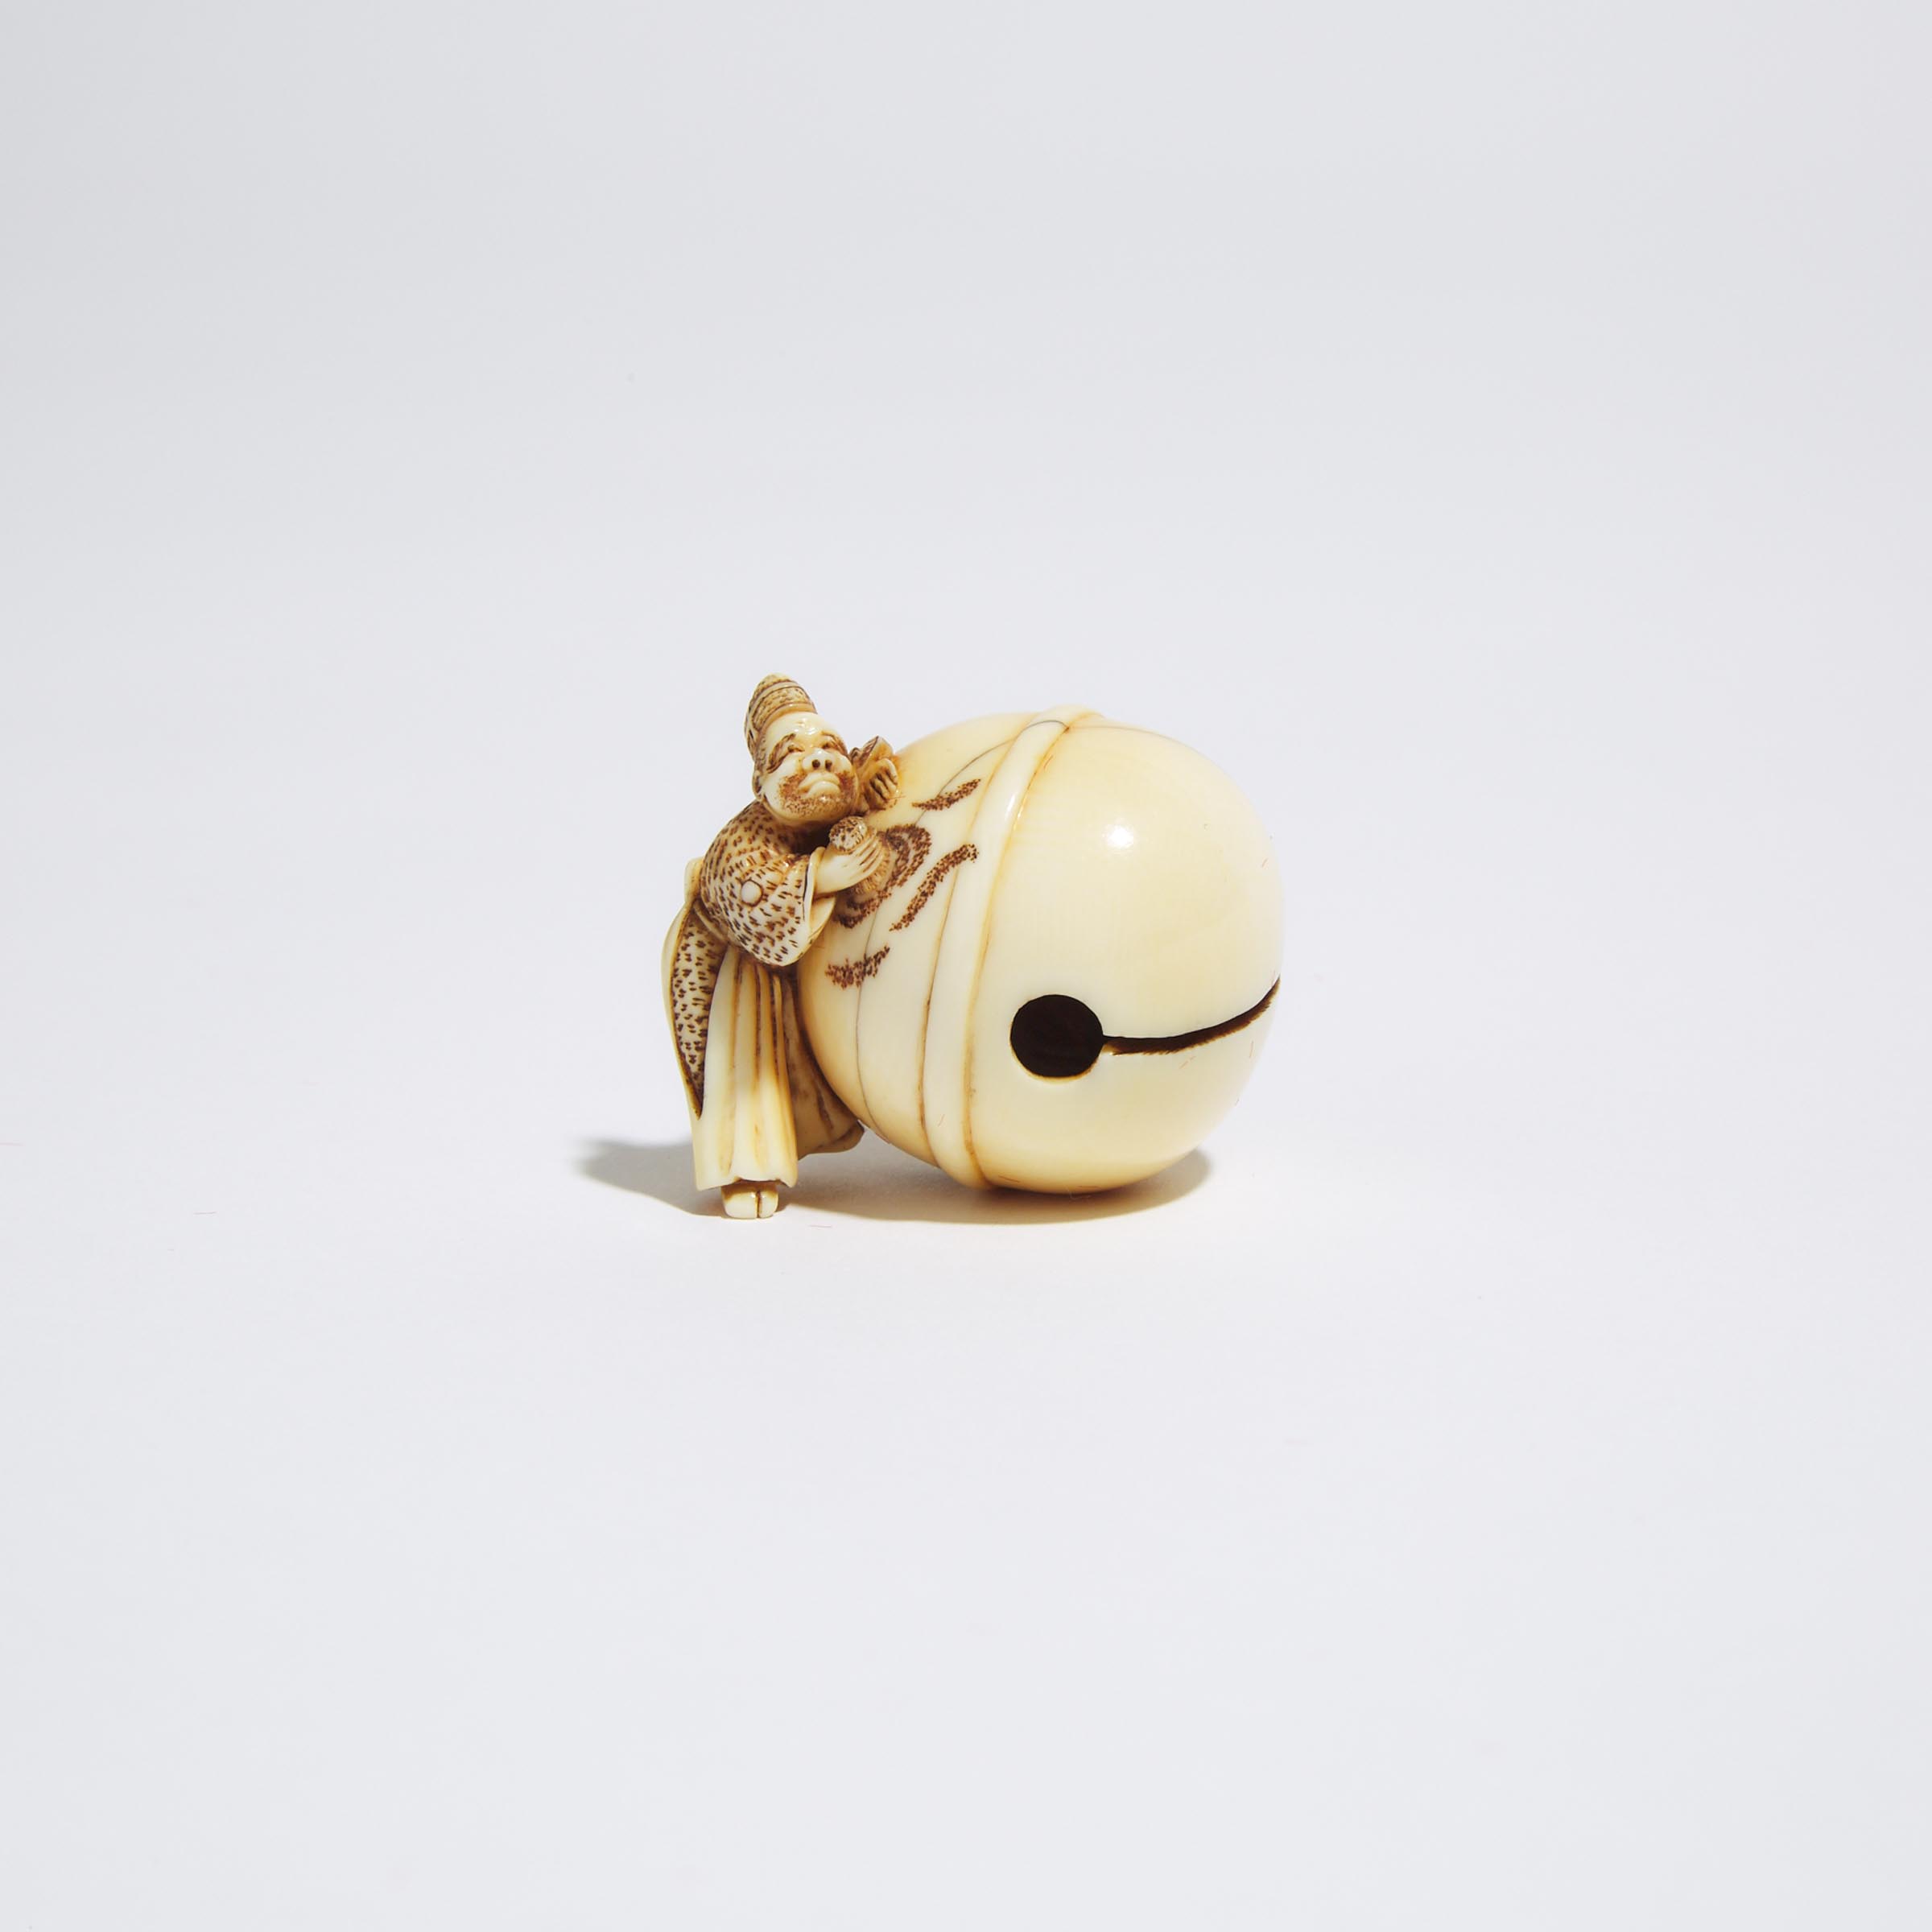 An Ivory Netsuke of a Priest Cleaning a Large Bell, Signed Shuosai, Edo/Meiji Period, 19th Century